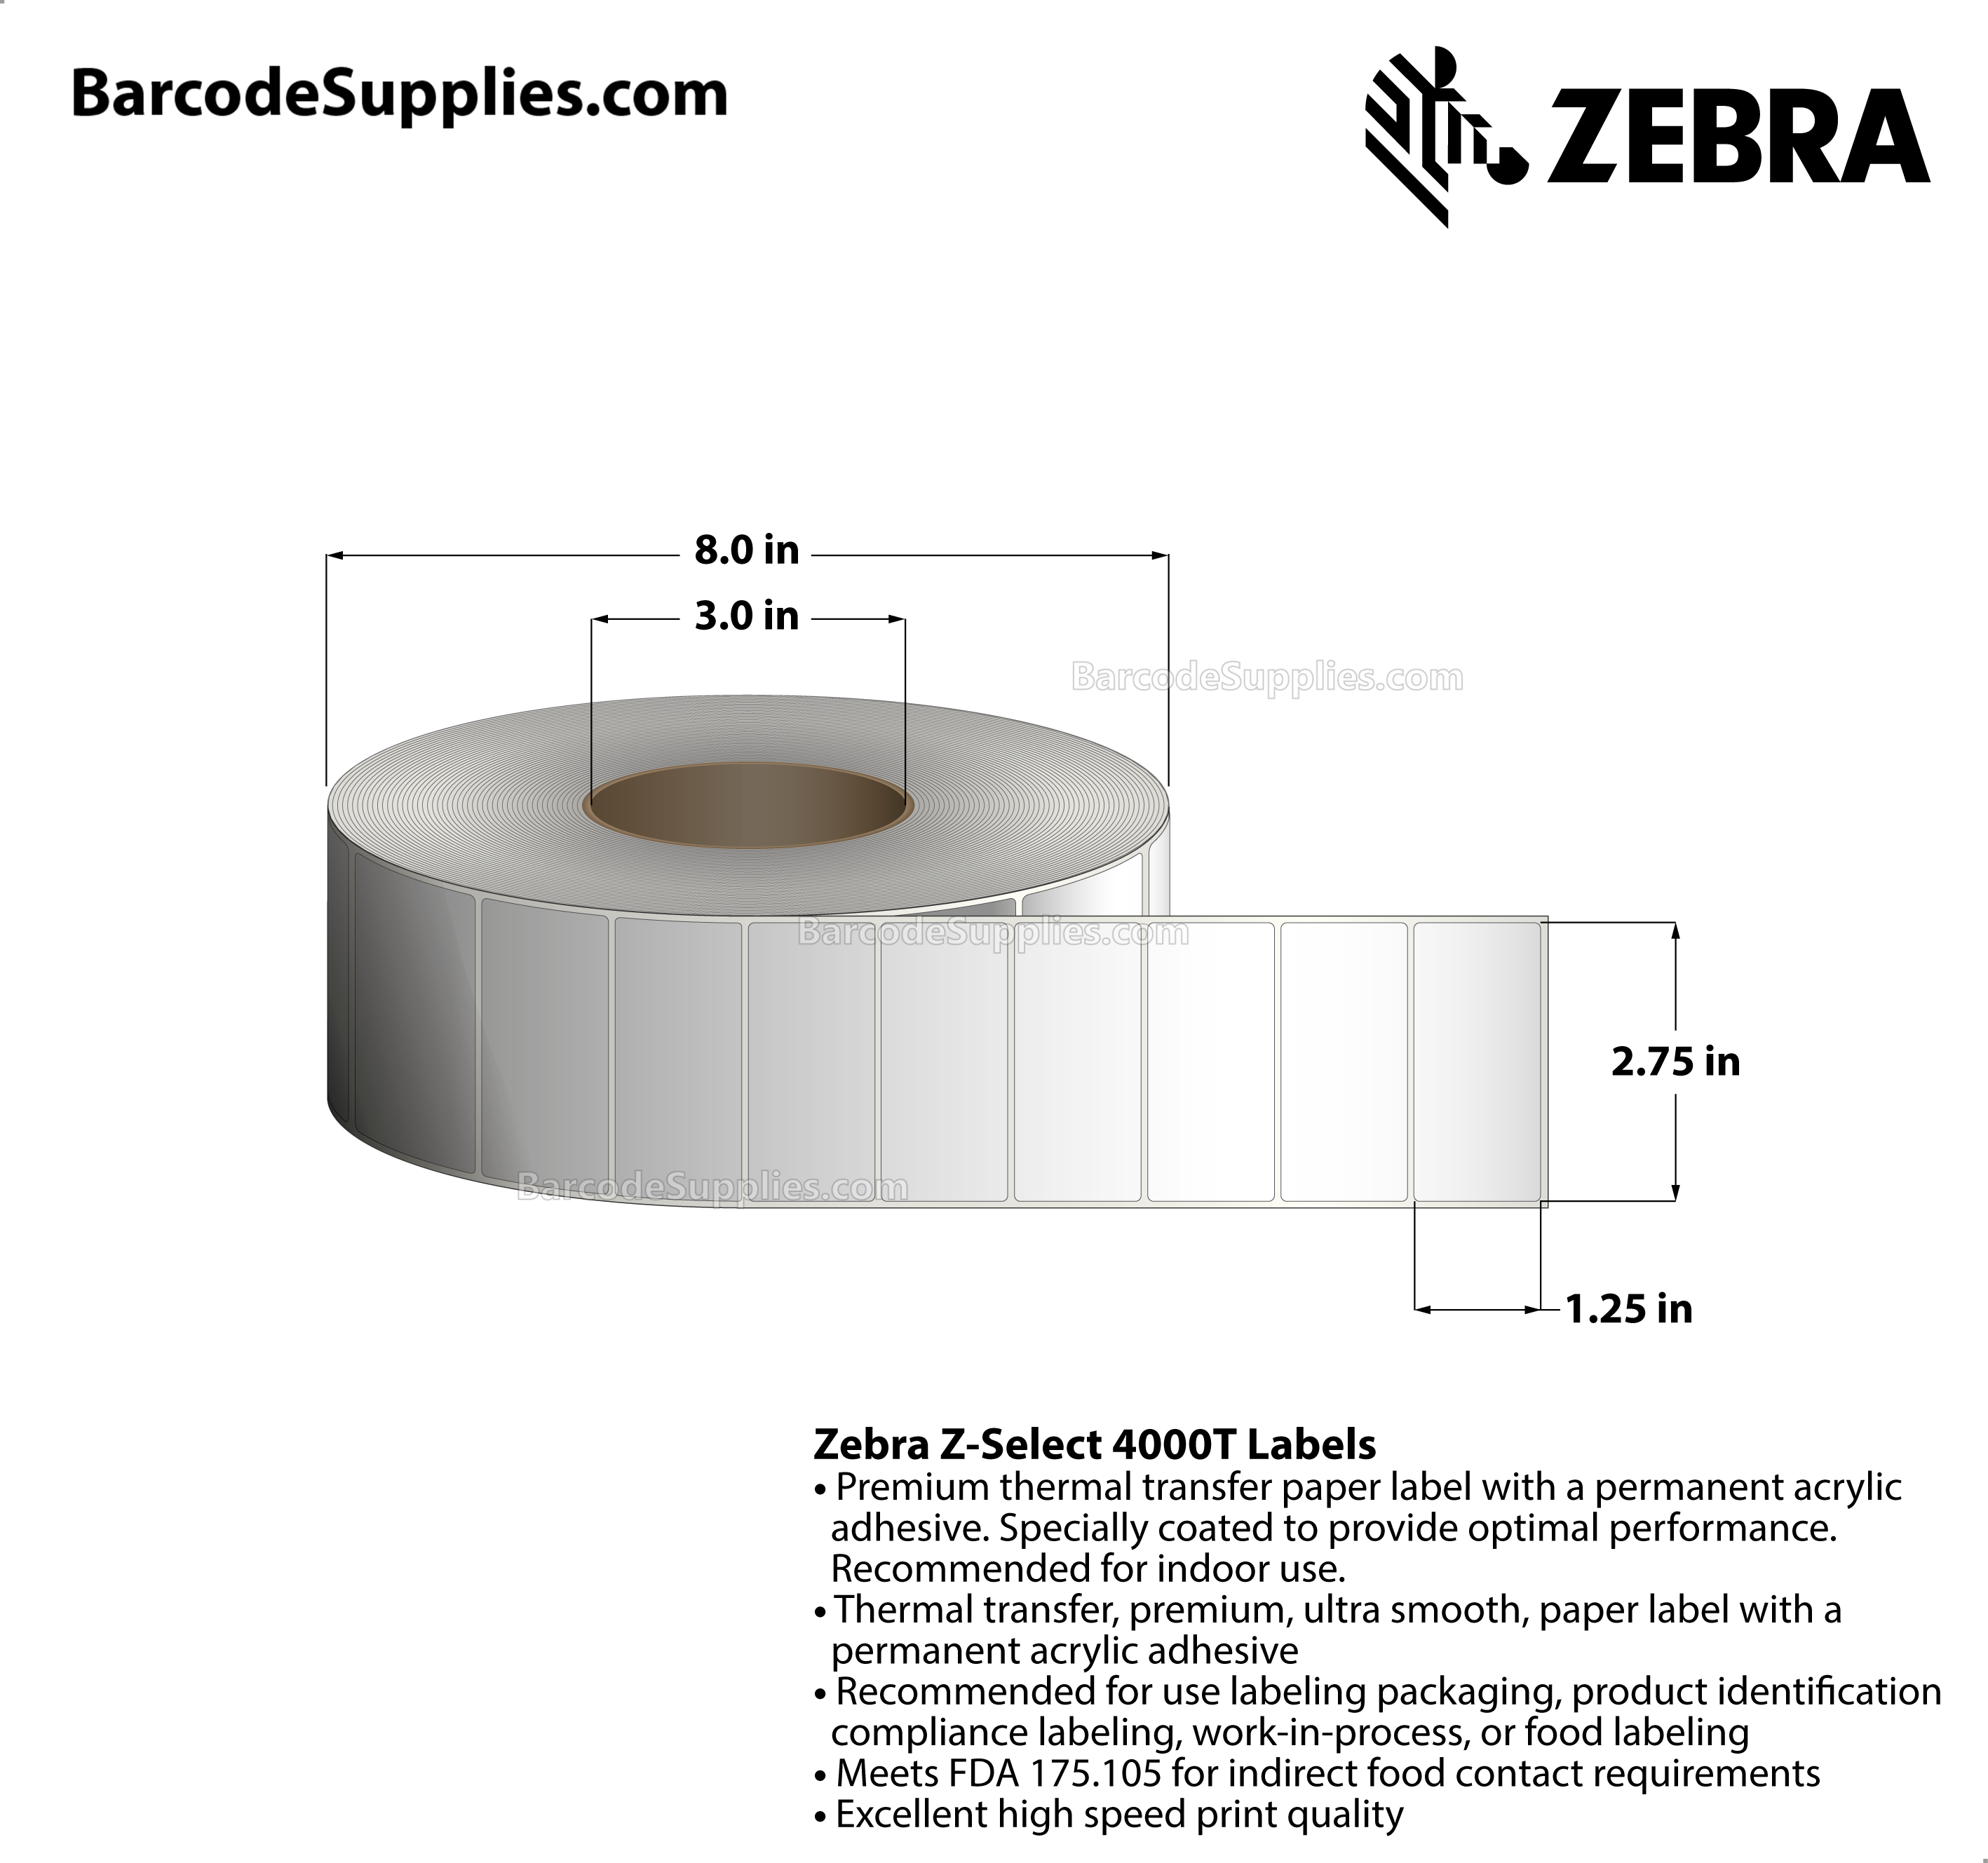 2.75 x 1.25 Thermal Transfer White Z-Select 4000T Labels With Permanent Adhesive - Not Perforated - 4240 Labels Per Roll - Carton Of 8 Rolls - 33920 Labels Total - MPN: 72282